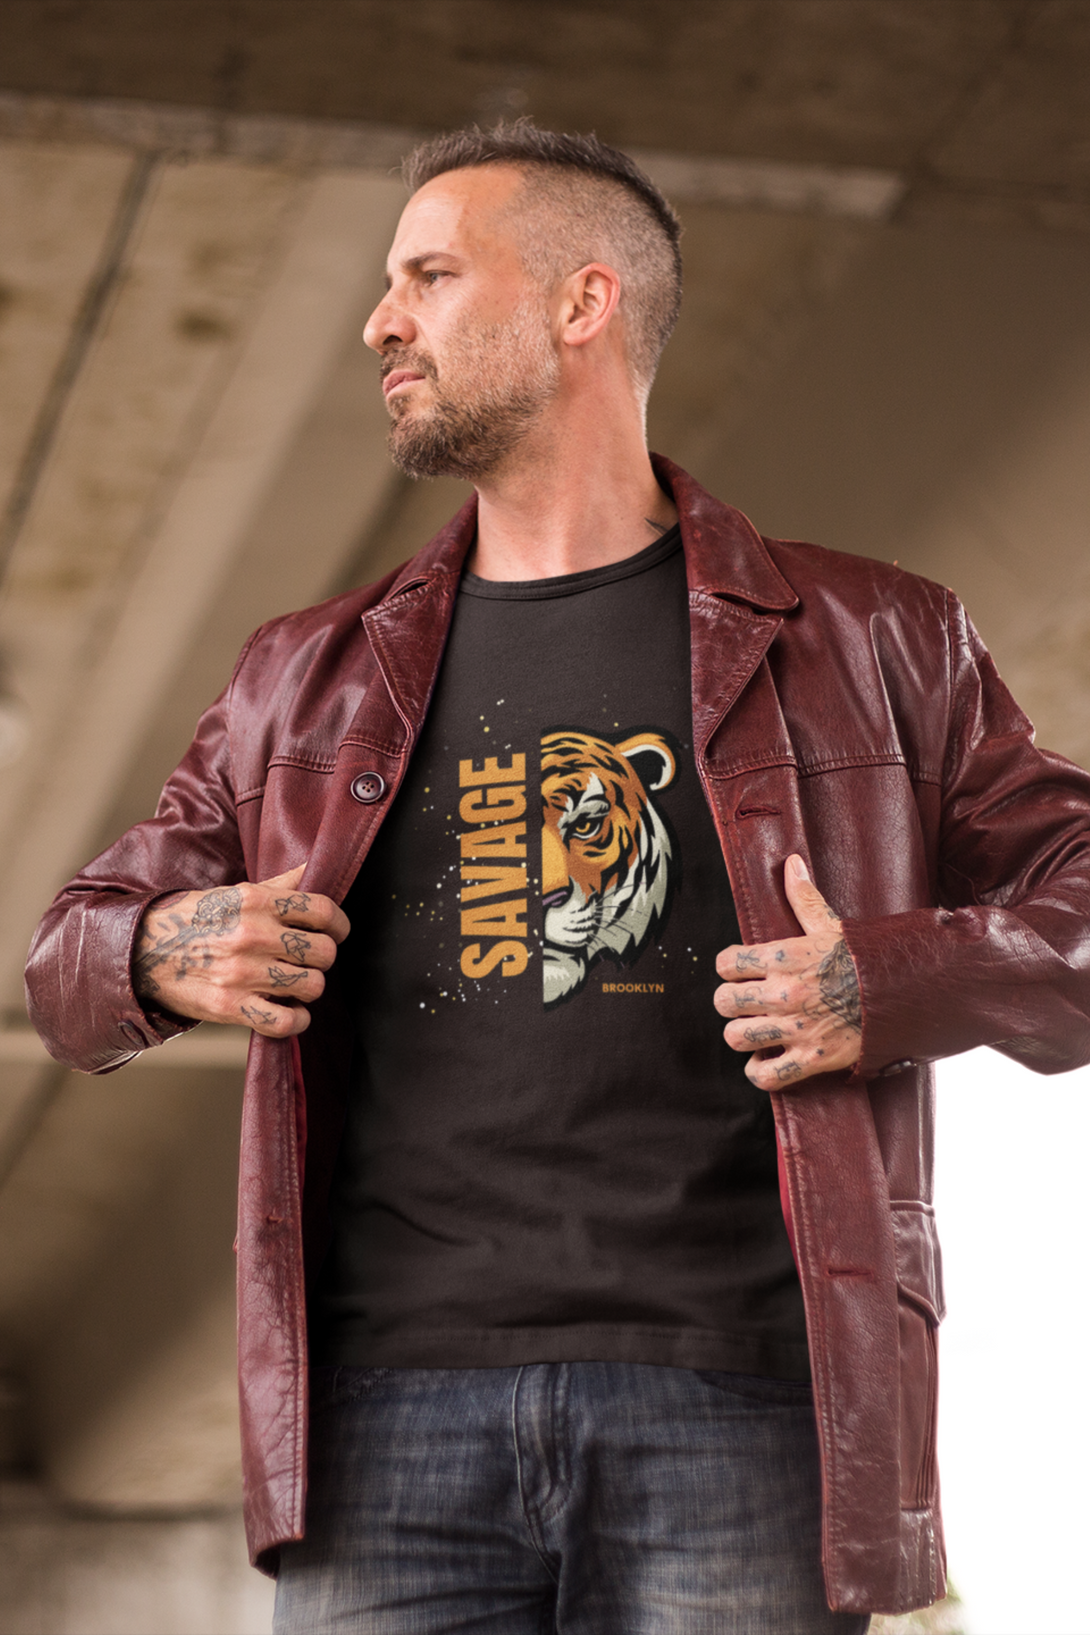 Save The Tiger Printed T-Shirt For Men - WowWaves - 4